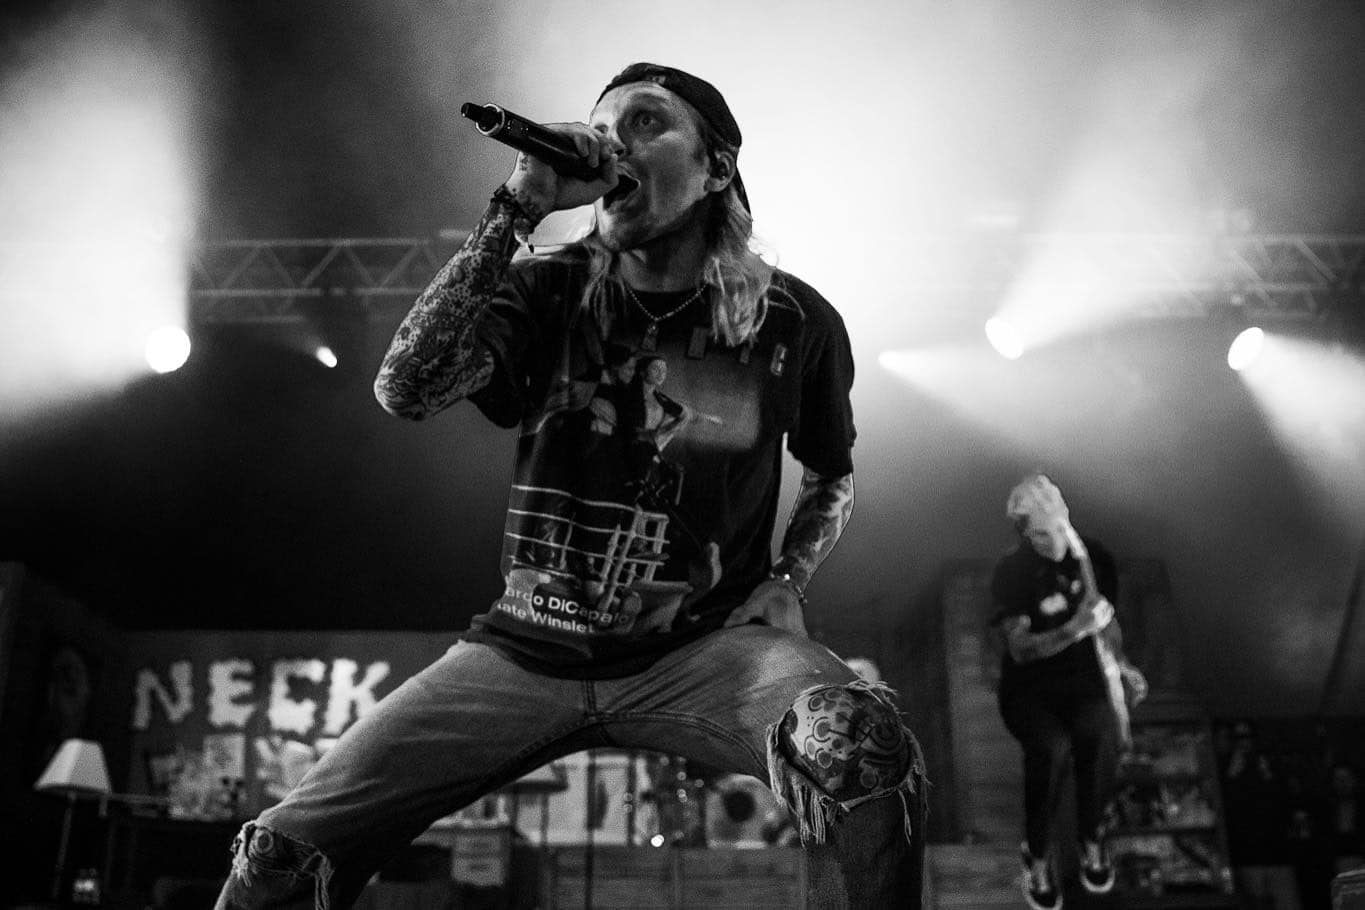 From locals to headliners: Neck Deep goes full circle at Slam Dunk